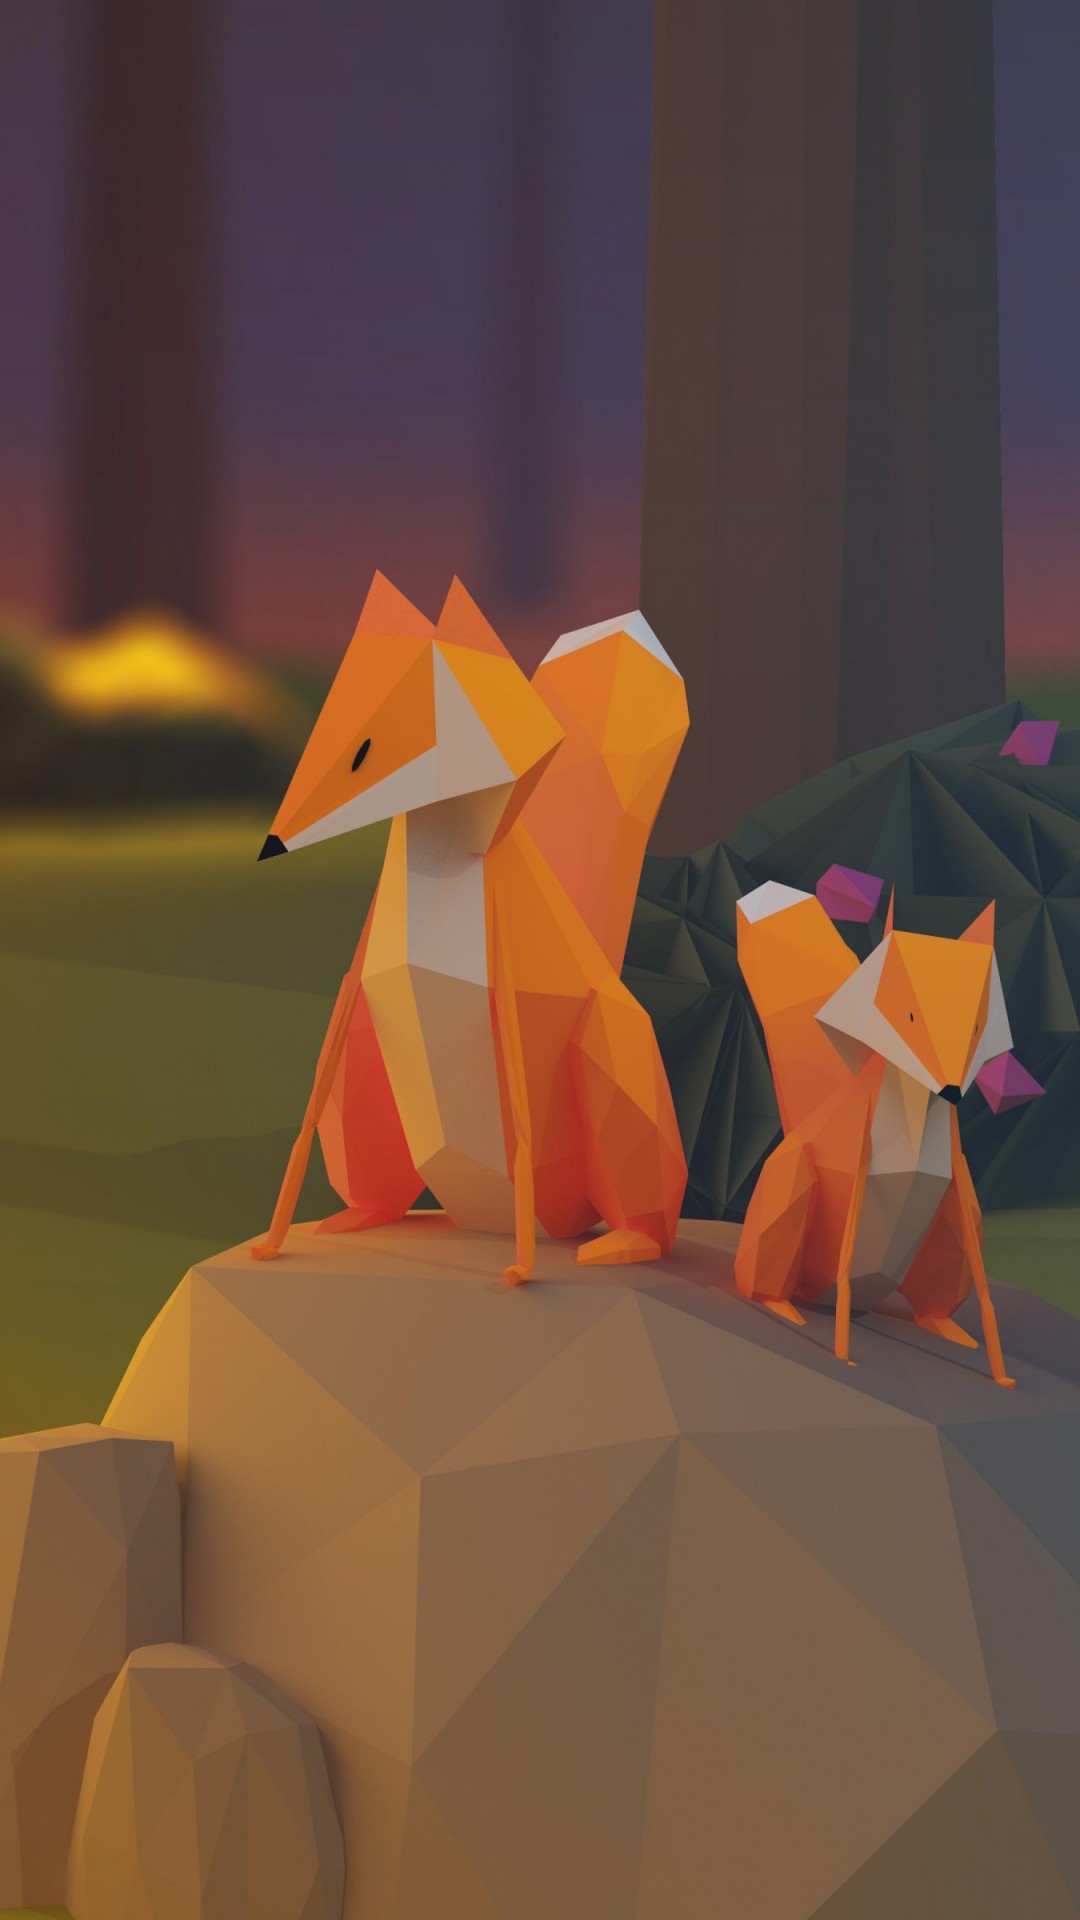 Low Poly Foxes Wallpaper for SONY Xperia Z1